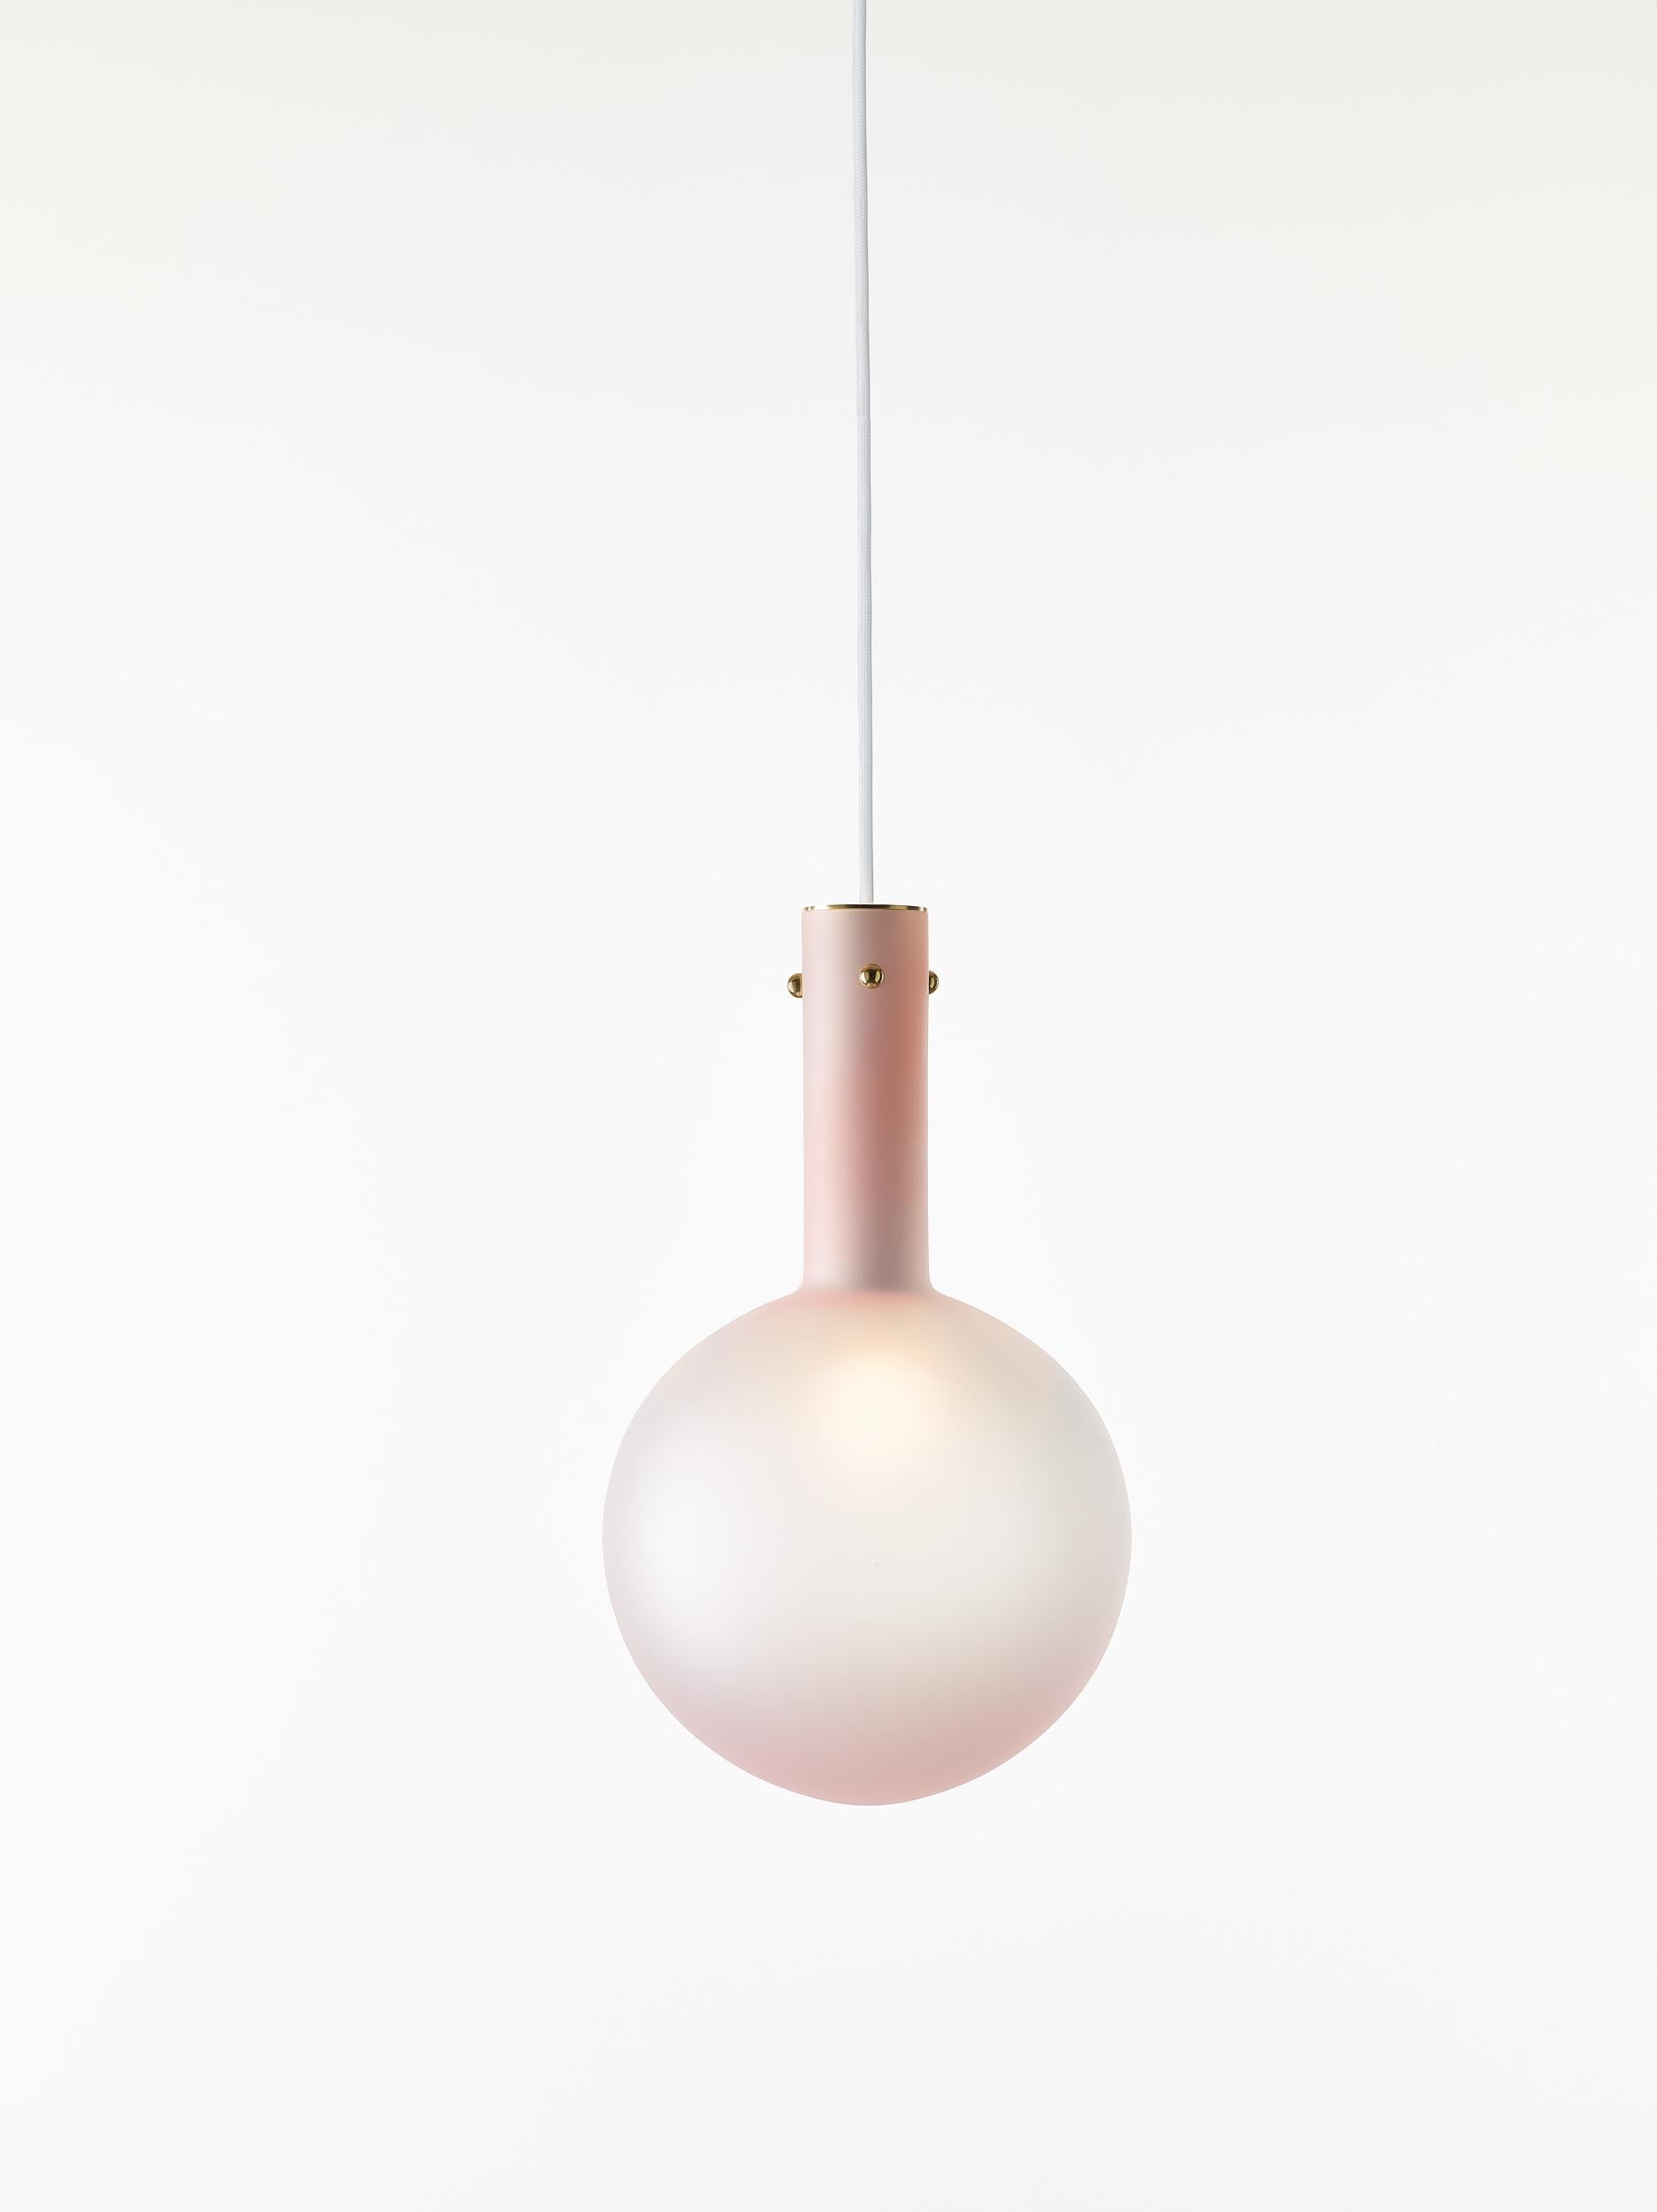 Set of 2 matte pink sphaerae pendant lights by Dechem Studio
Dimensions: D 20 x H 180 cm
Materials: brass, metal, glass.
Also available: different finishes and colours available.
Only one homogenous piece of hand blown glass creates the main body